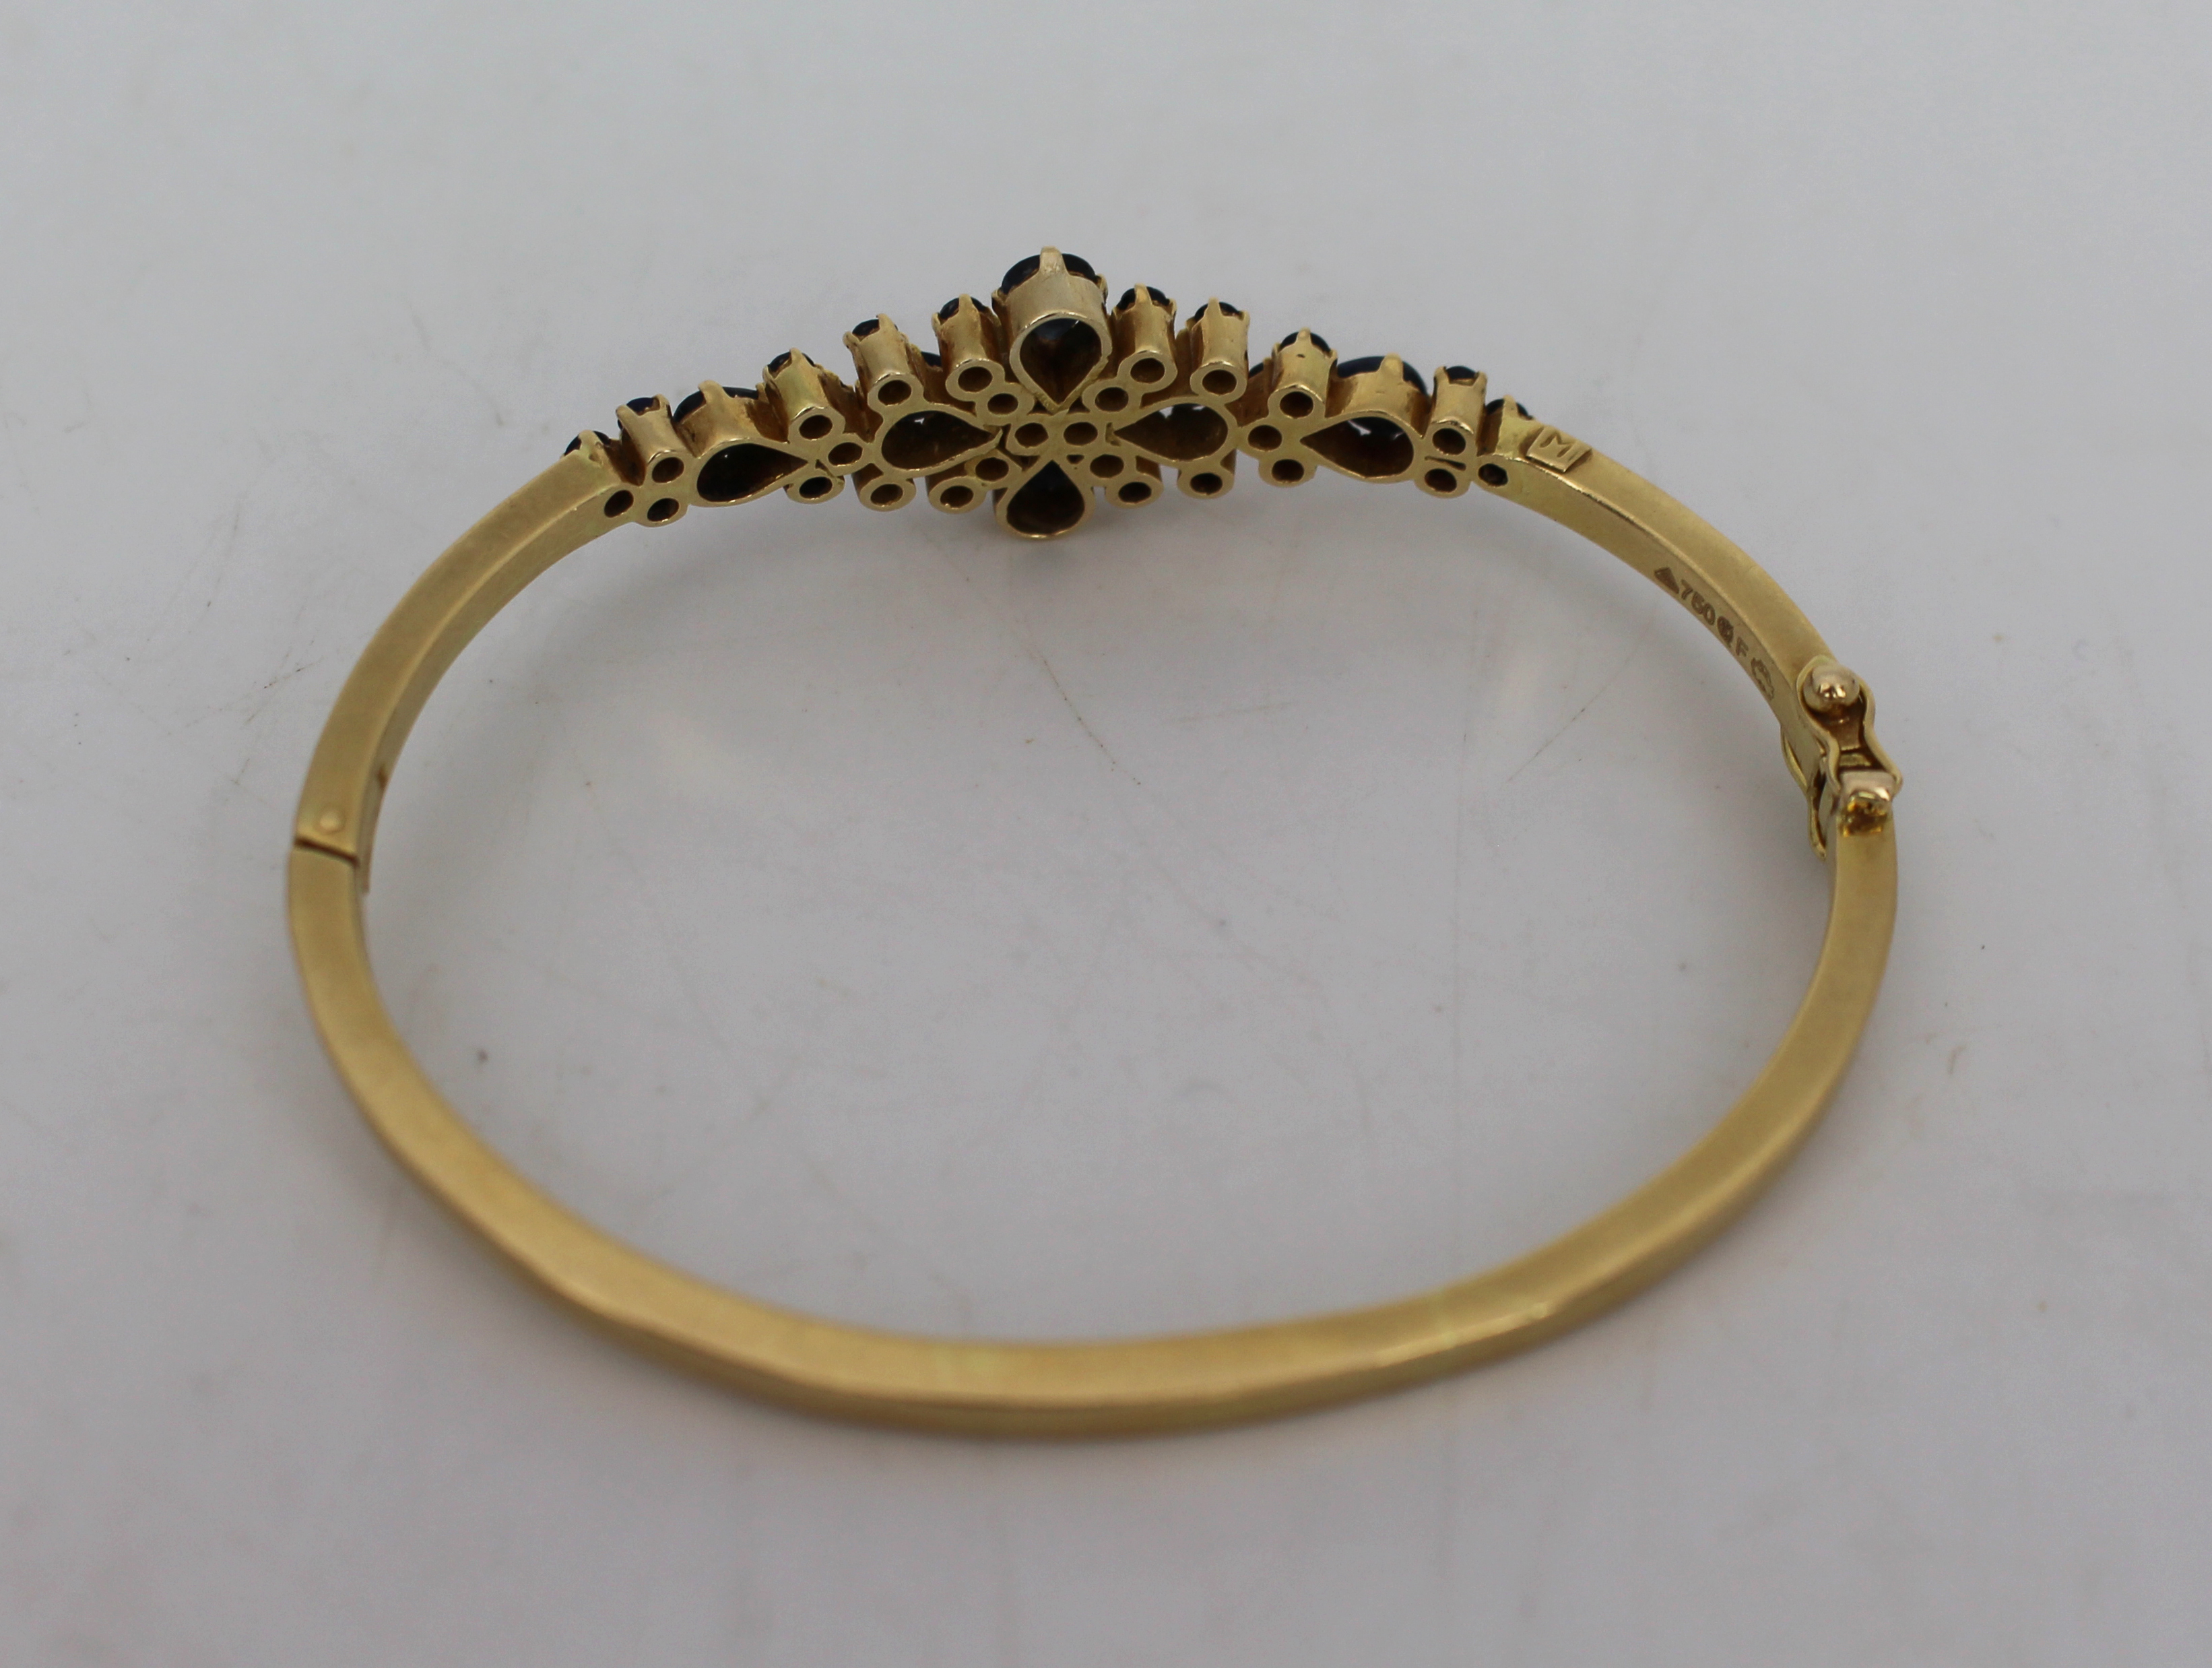 Russian Sapphire 18ct Gold Bracelet - Image 4 of 4